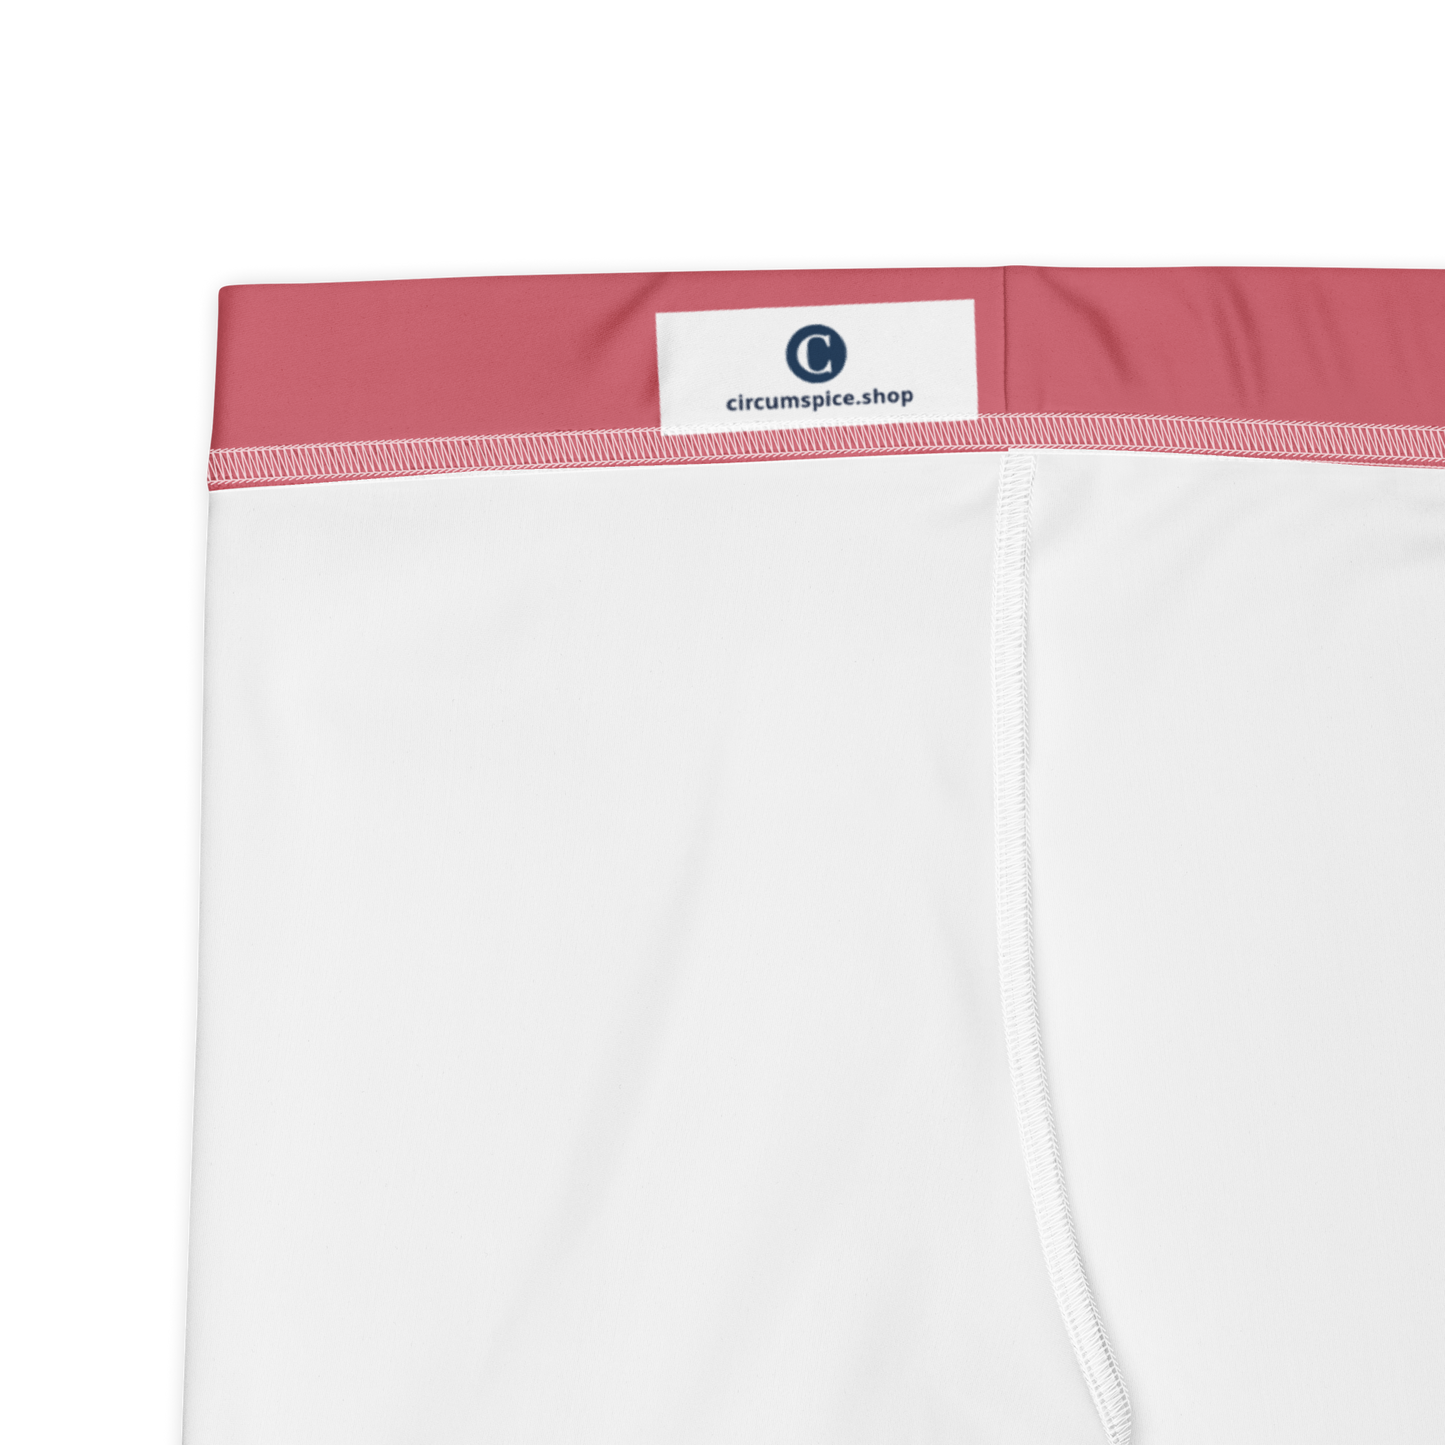 Michigan Upper Peninsula Tight Shorts (w/ UP Outline) | Watermelon Pink